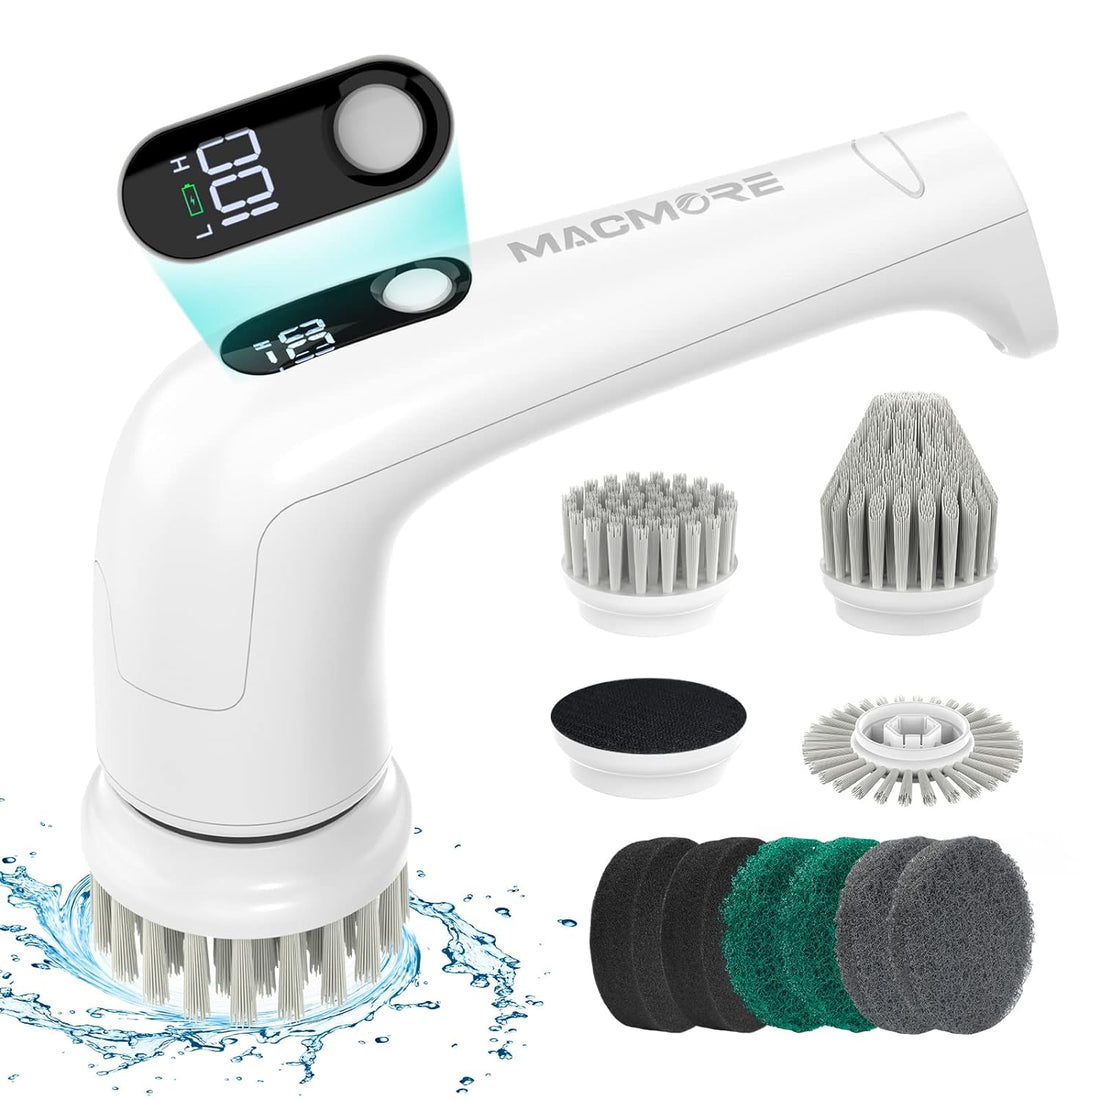 MACMORE Electric Spin Scrubber, Shower Scrubber for Cleaning with 4 Replaceable Cleaning Heads and 9 Scouring Pad, Blasting Sponge, electric scrubber for Bathroom, Tub, Tile, Floor